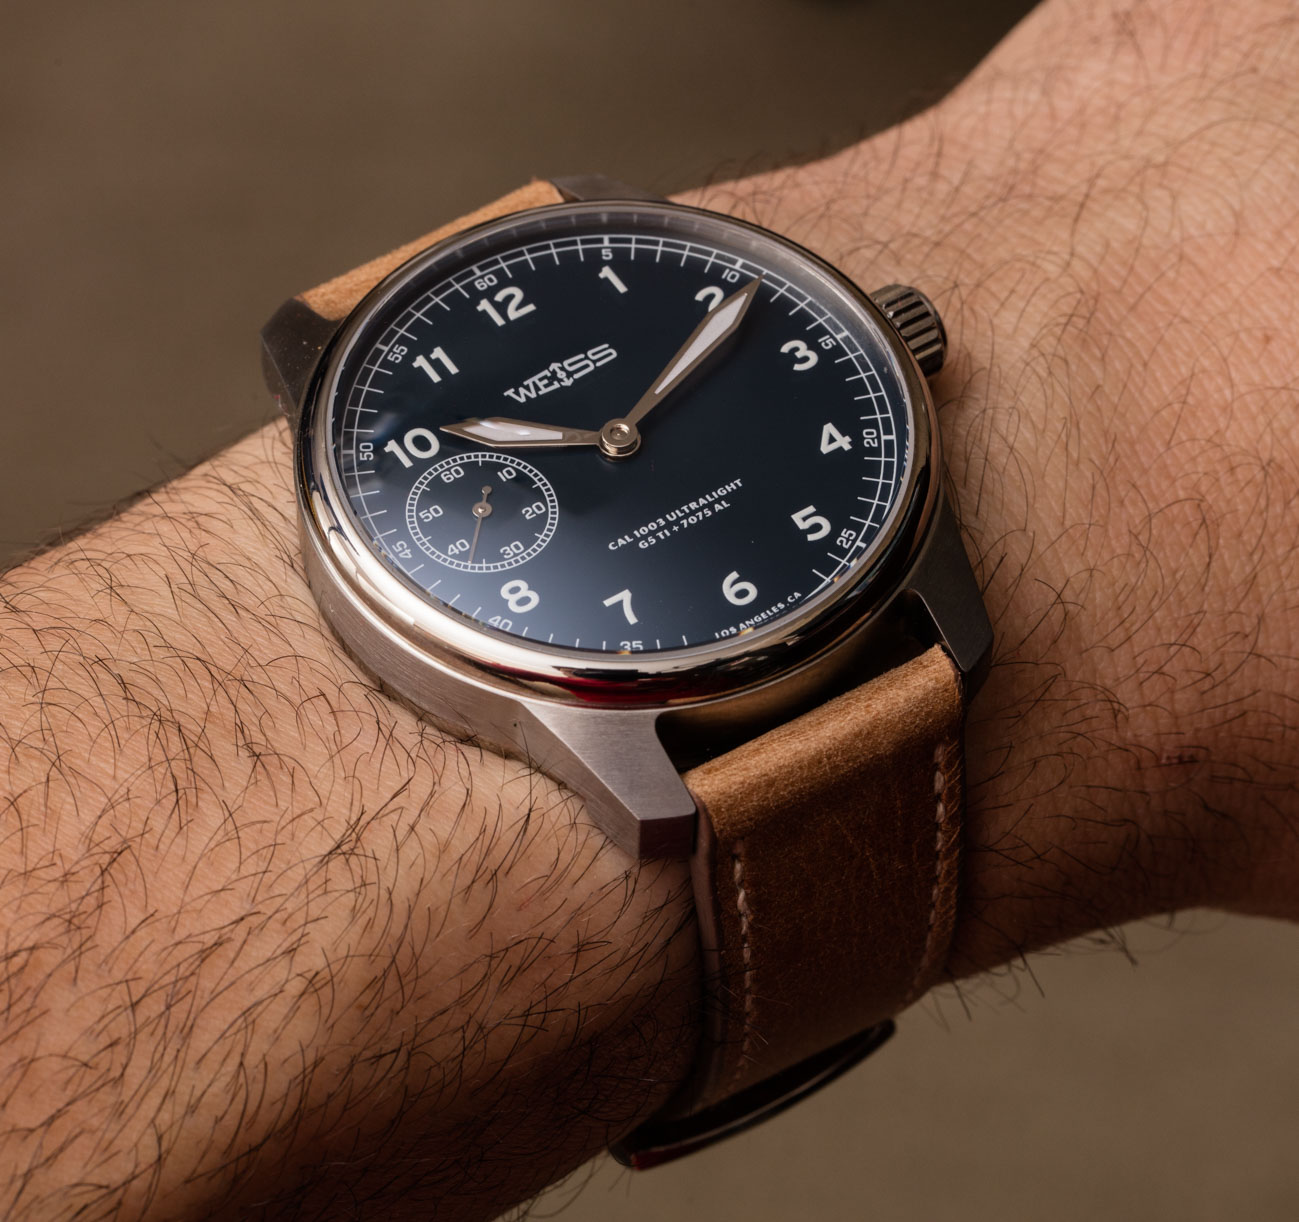 Weiss American Issue Field Watch Ultralight In Titanium And Aluminum Hands-On